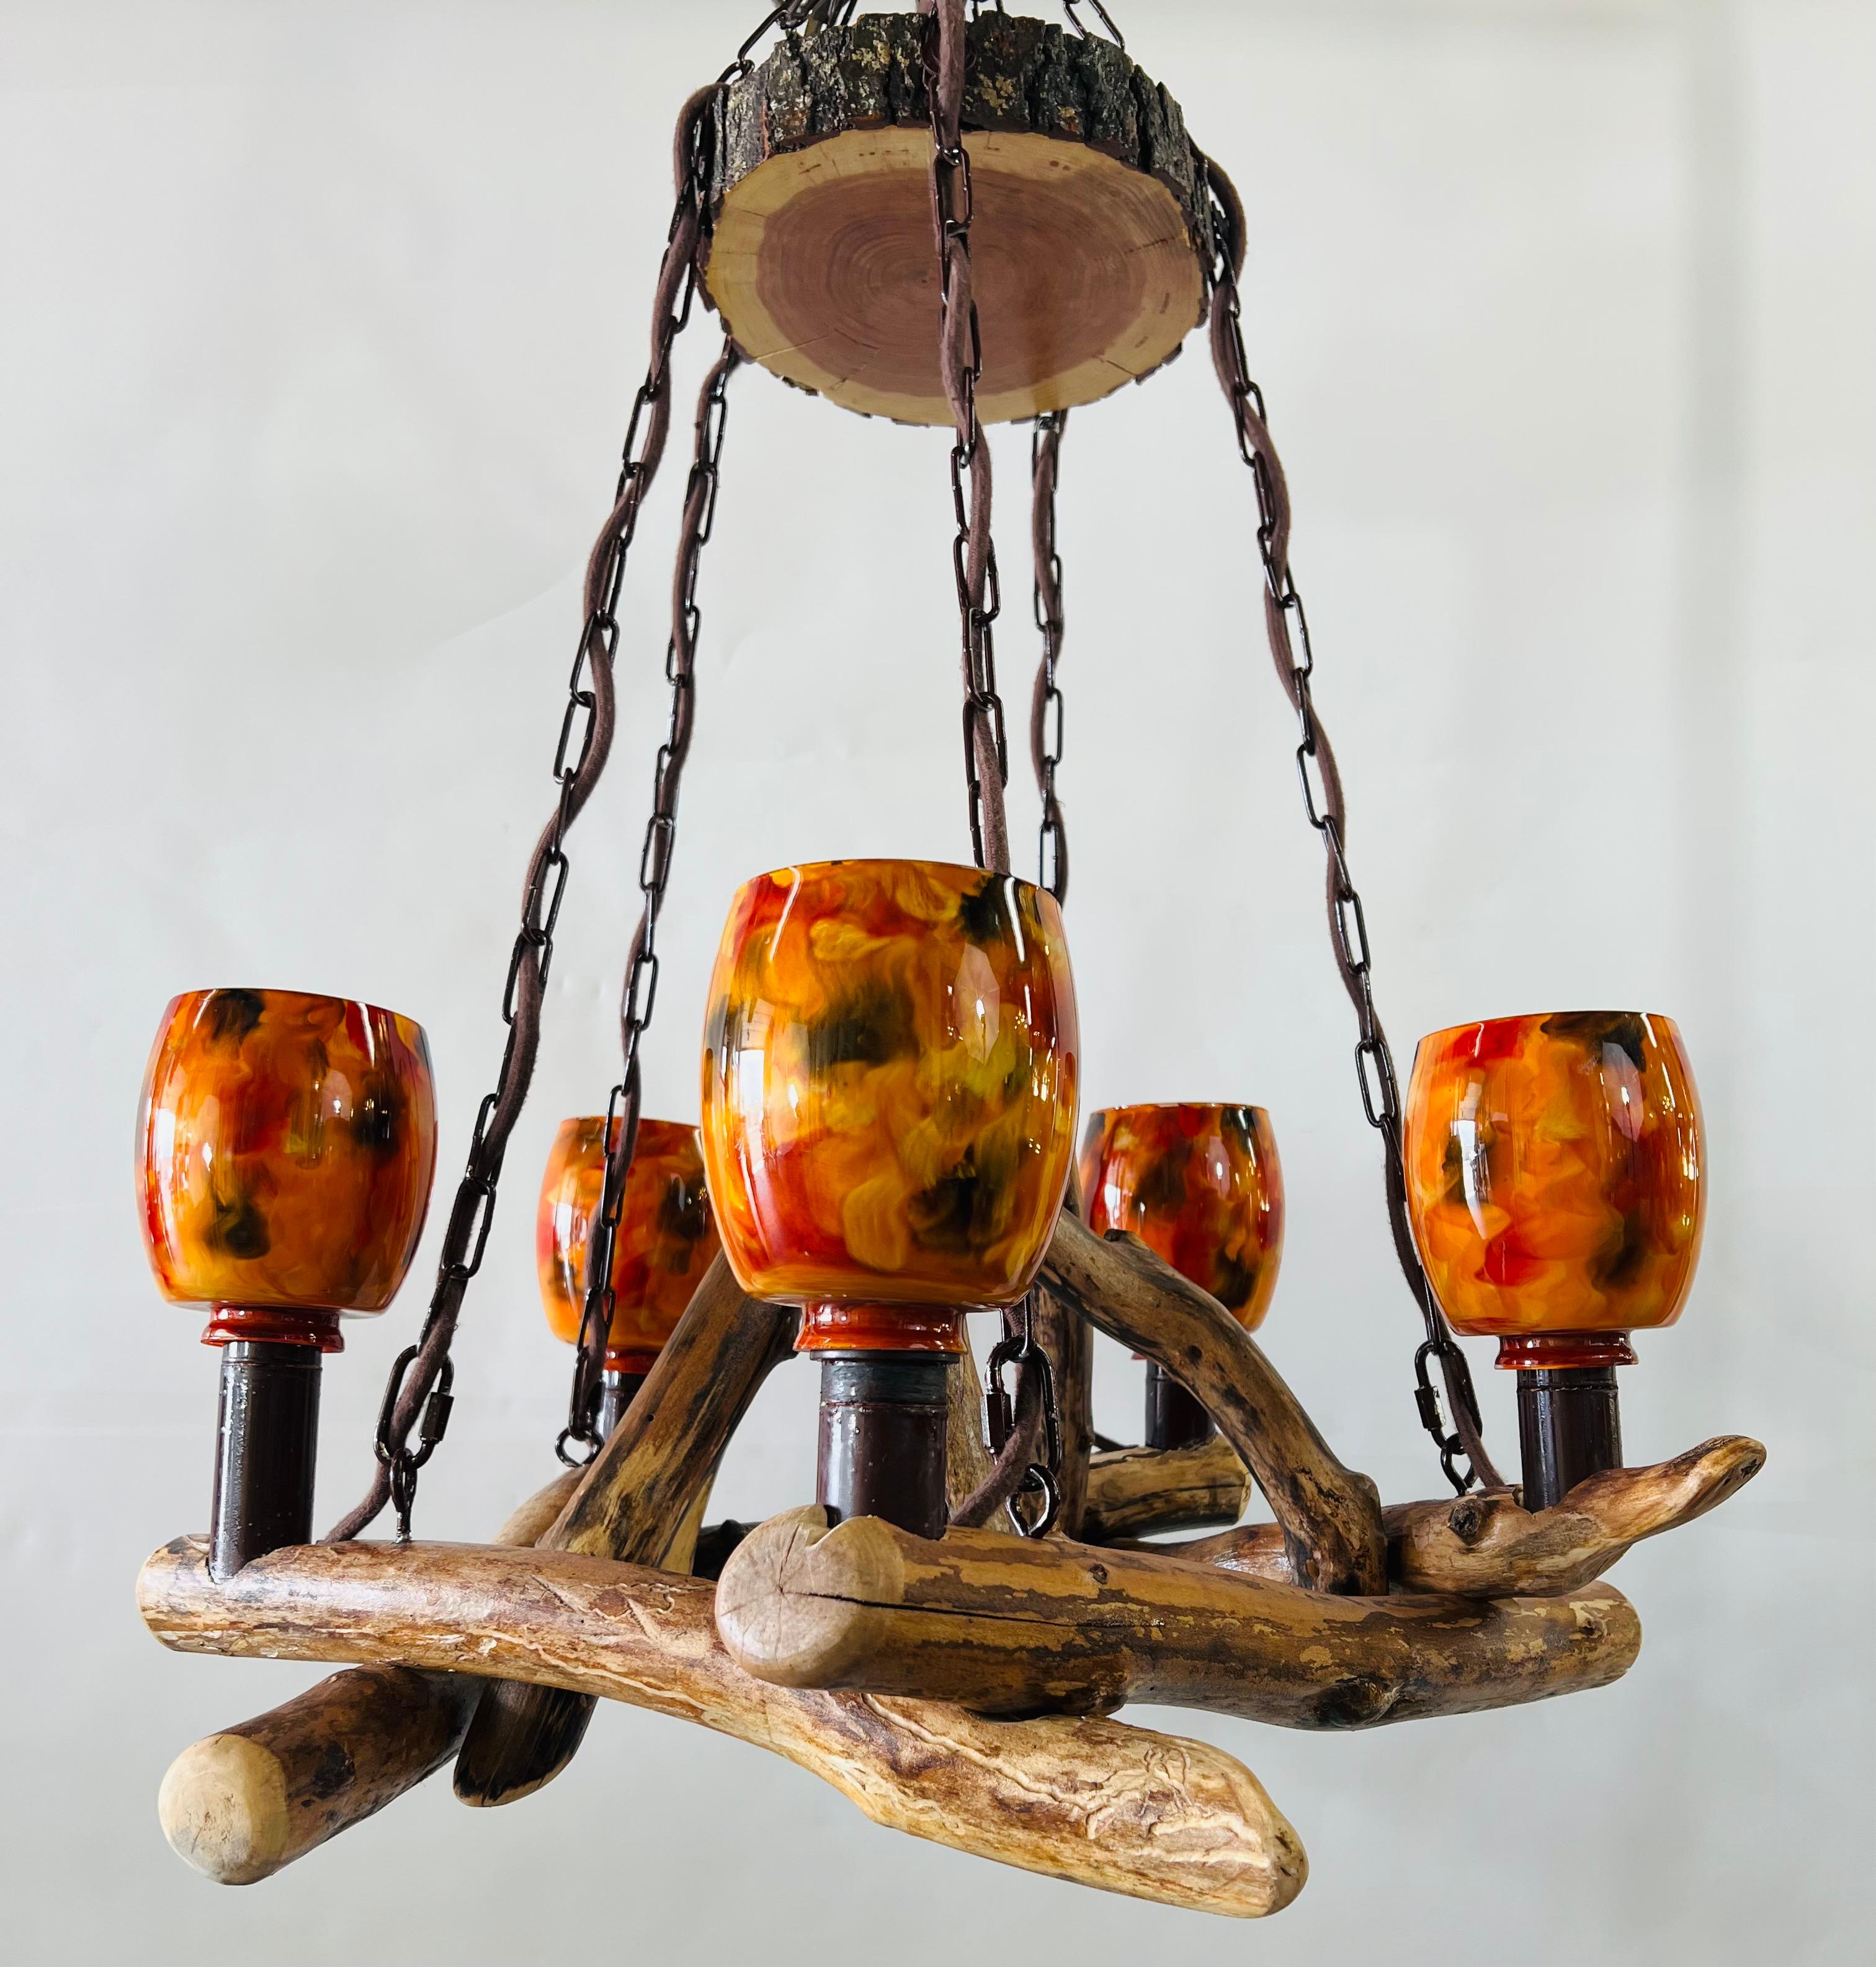 A stylish and one of a kind rustic Adirondack style chandelier with custom orange hurricane glass shades. In an organic modern design, the chandelier has four Maple wood logs forming a square shape and hanging with 4 chains. The chandelier body dish